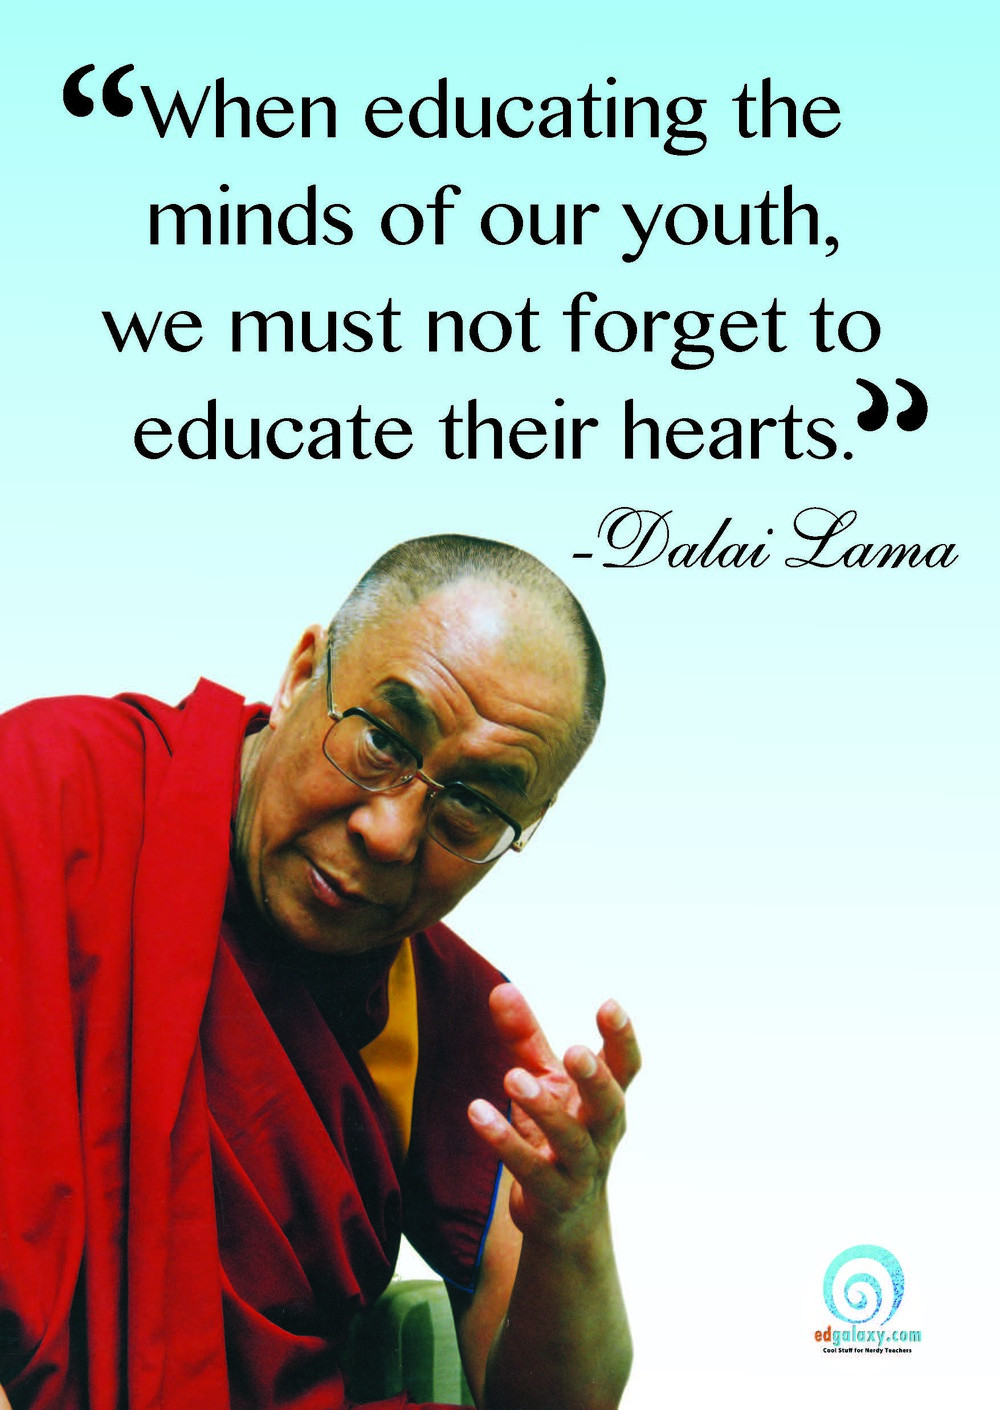 Famous Quotes About Education
 Education Quotes Famous Quotes for teachers and Students